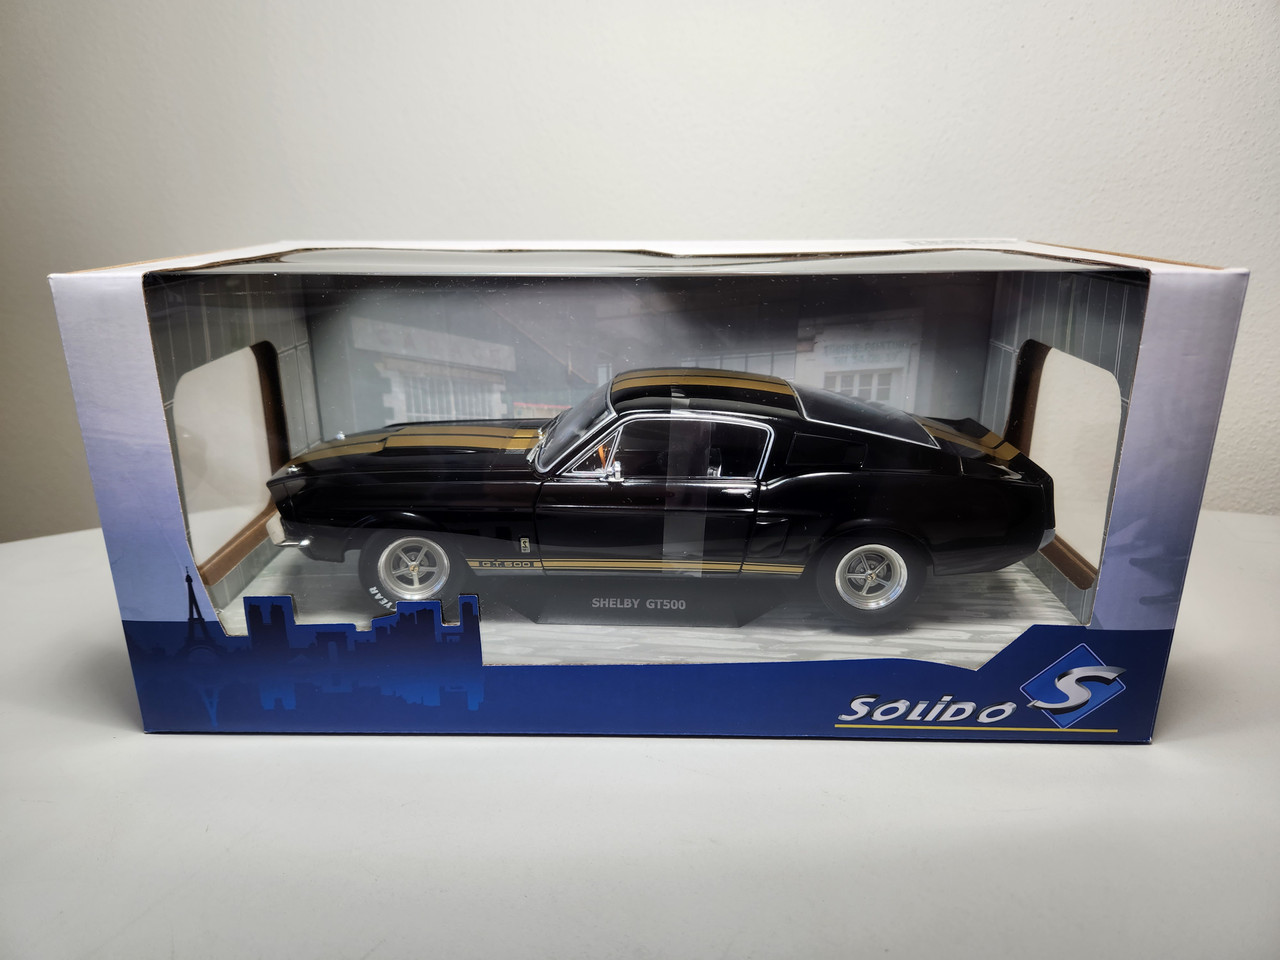 1:18 1967 Shelby GT500 Black with Gold Stripes by Solido